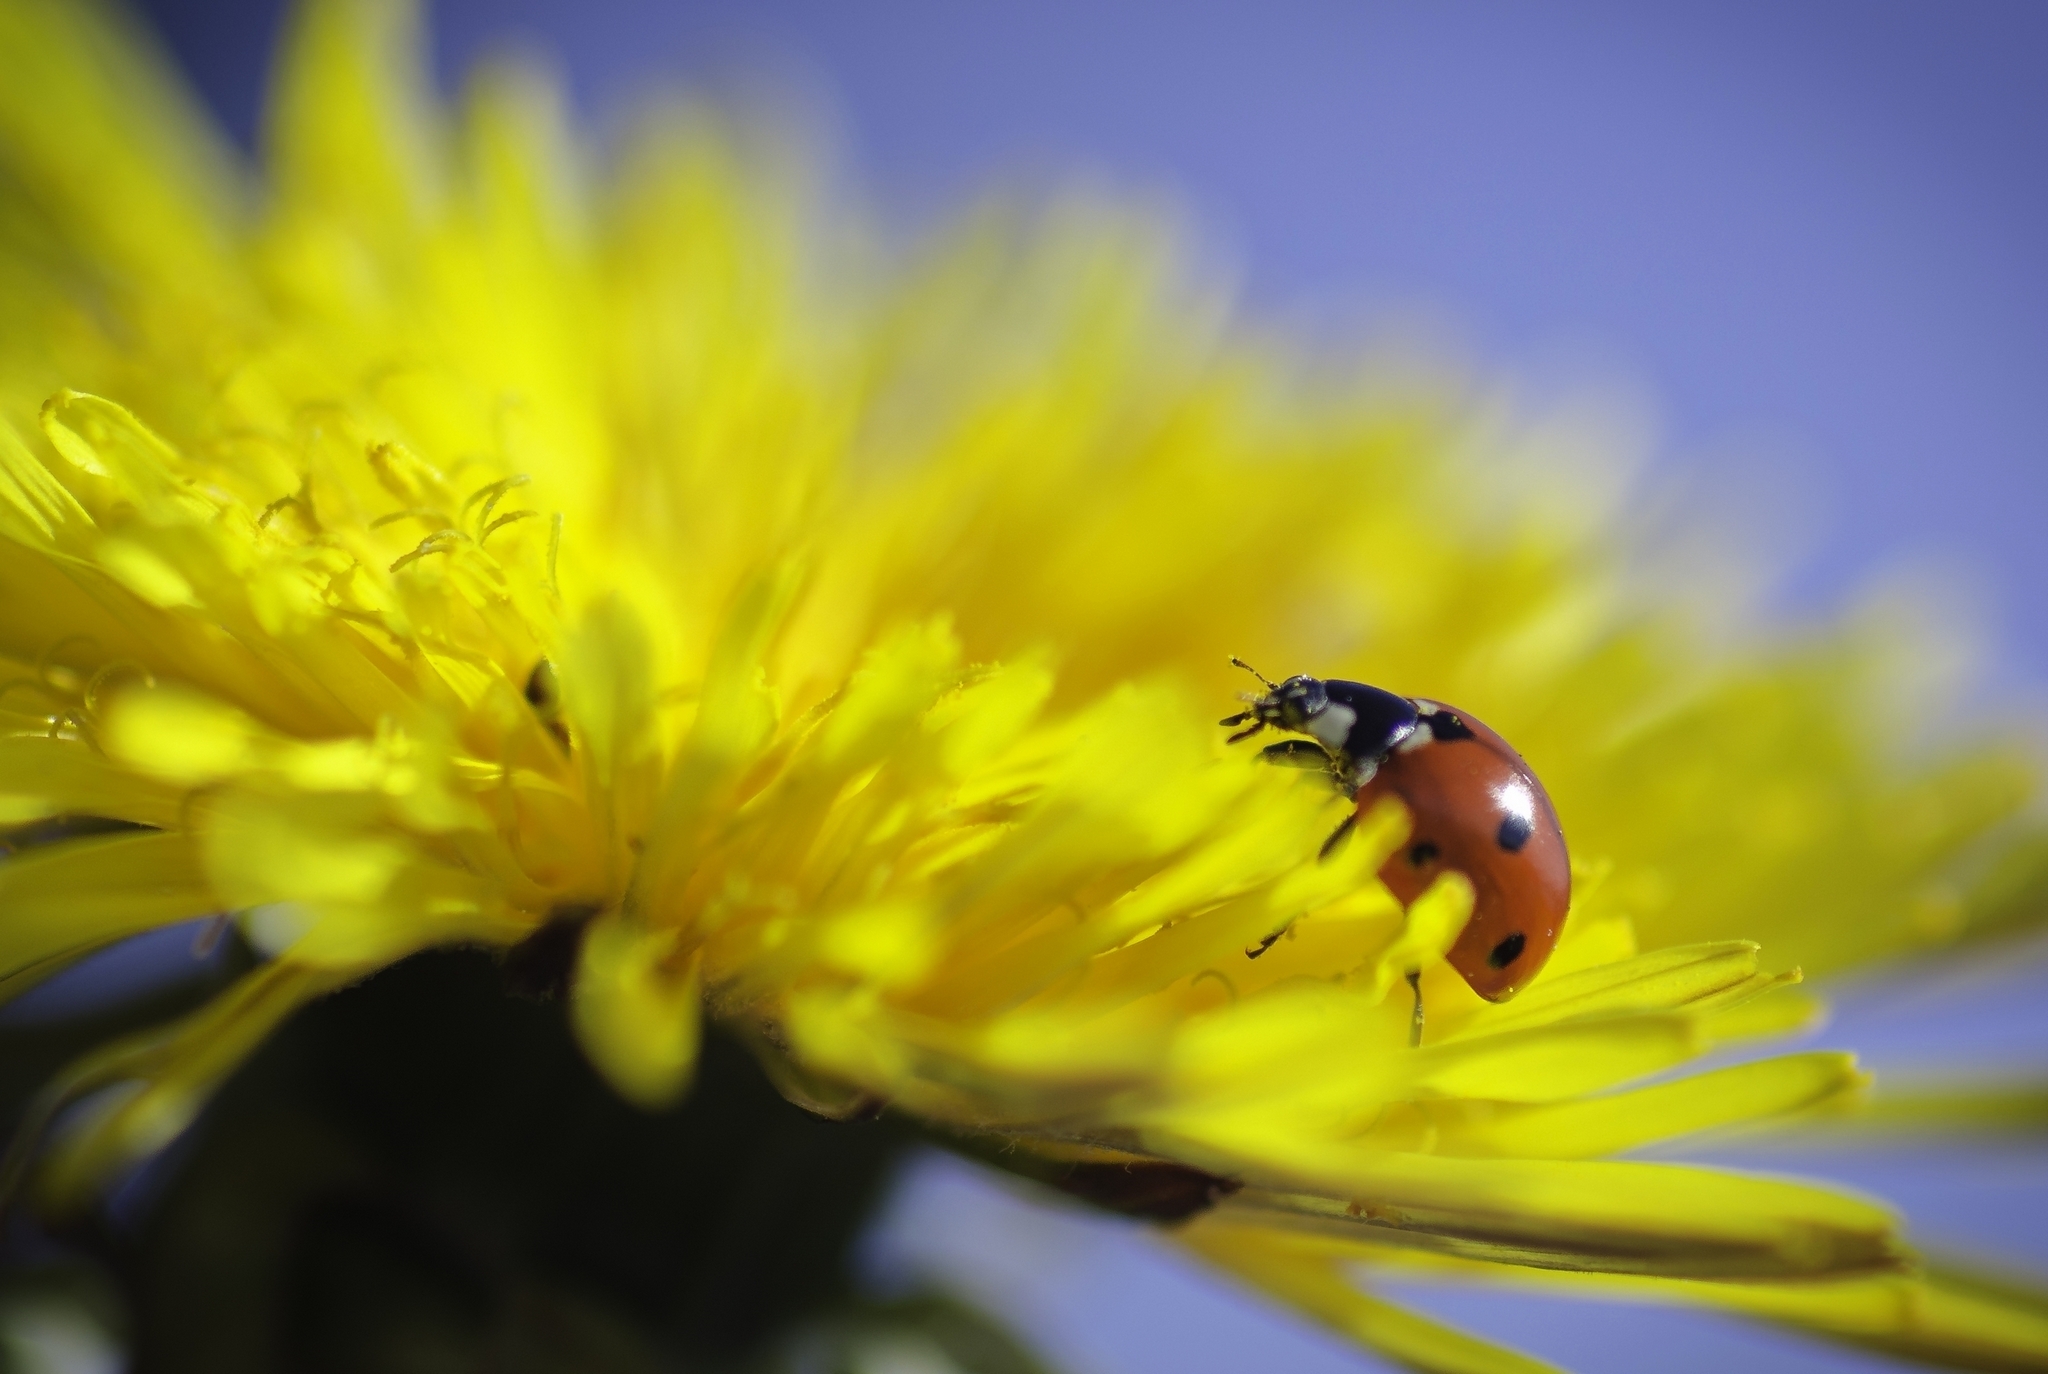 Wallpapers yellow flower ladybug insects on the desktop